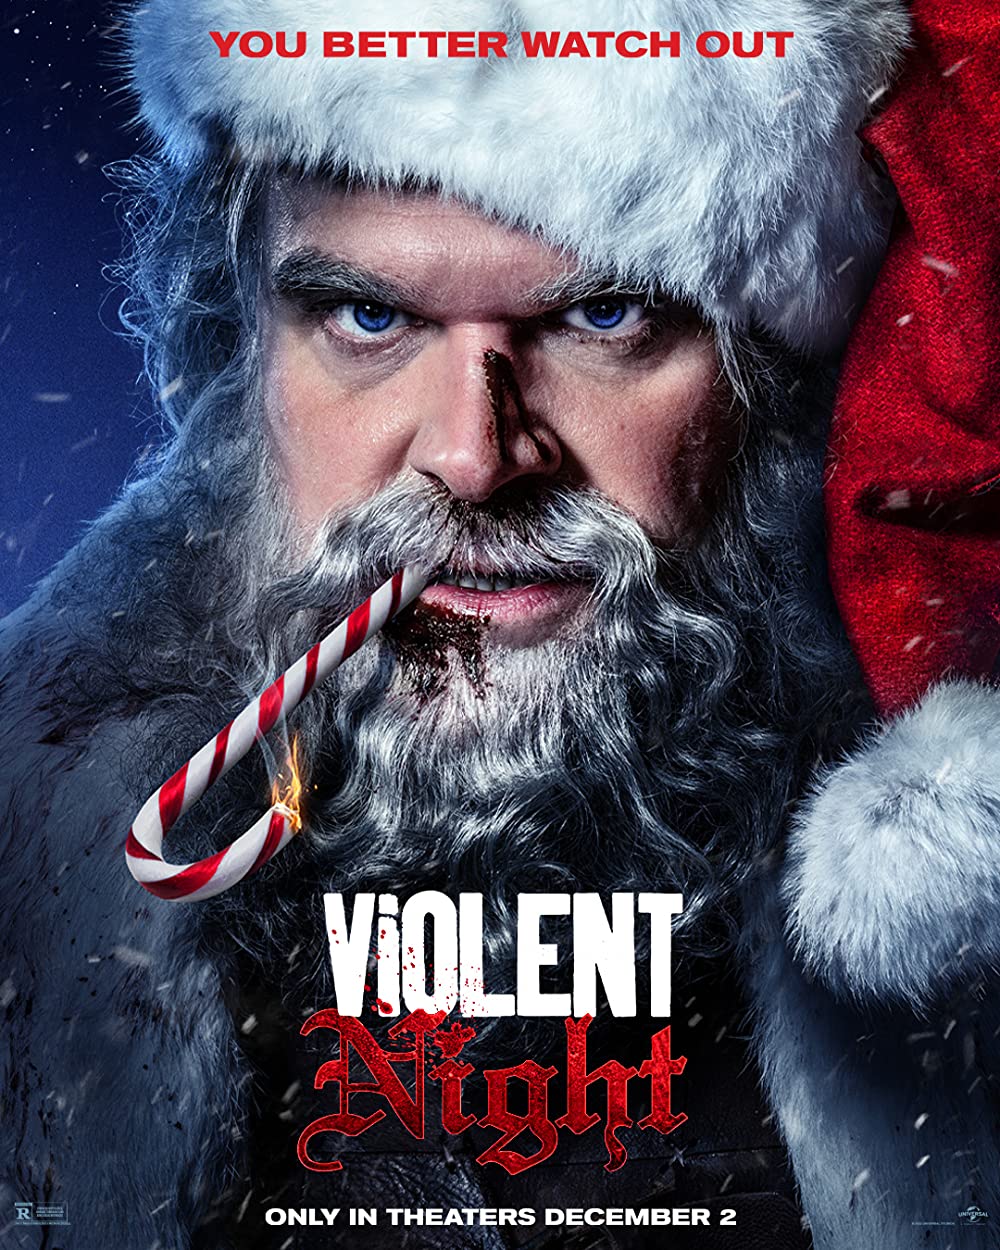 Violent Night Trailer – not your everyday mall Santa